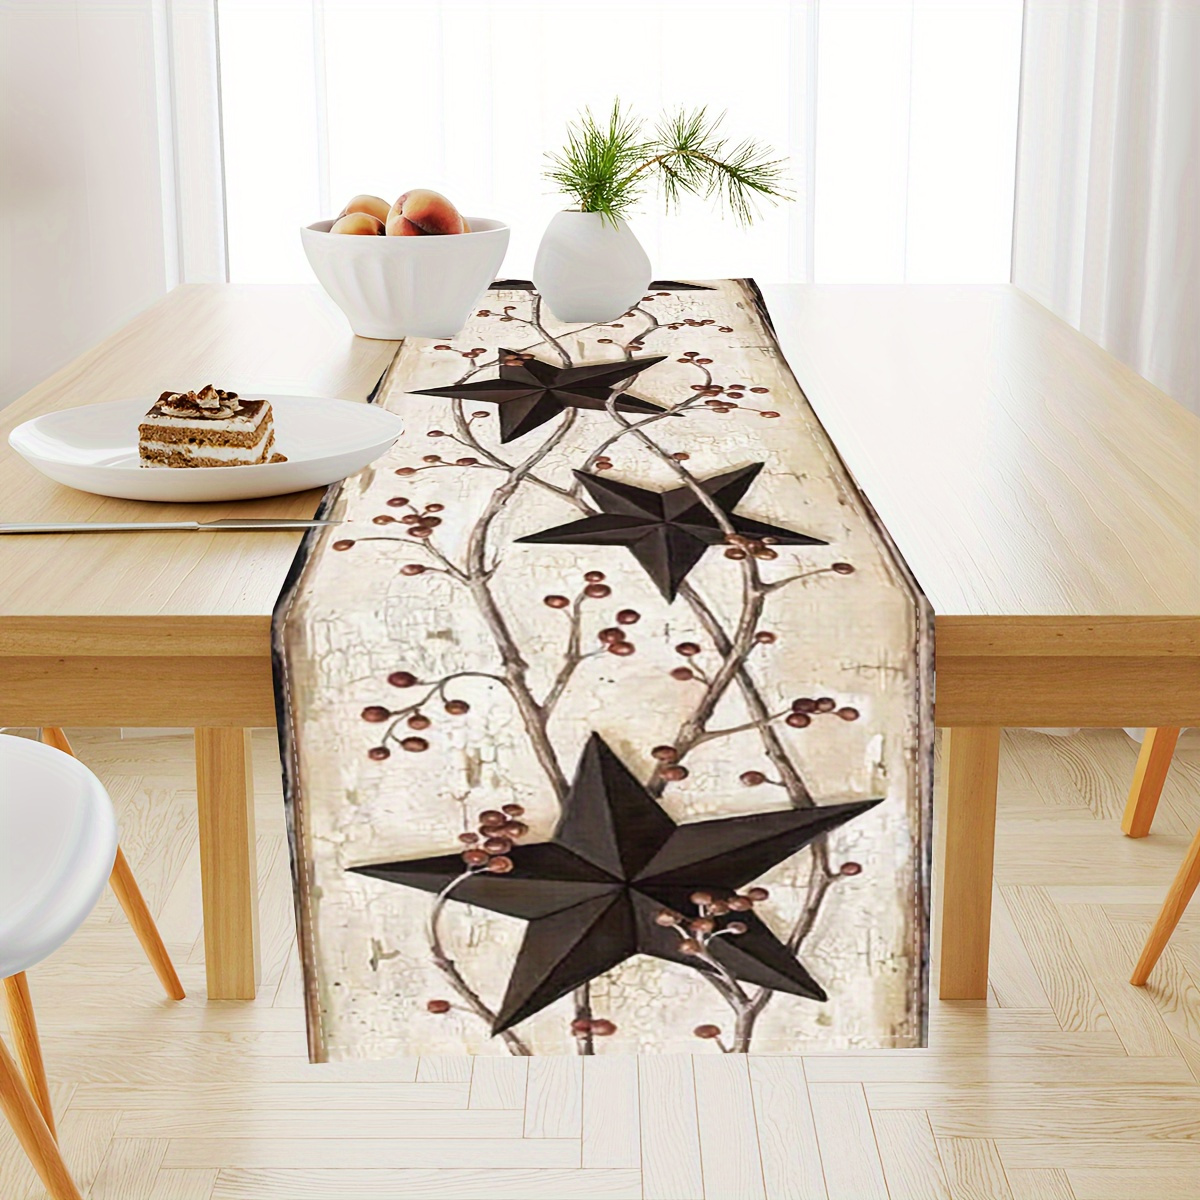 

Rustic Farmhouse Star Print Table Runner - Luxurious Polyester, Perfect For Parties, Holidays & Family Gatherings Rustic Table Runner Outdoor Table Decor